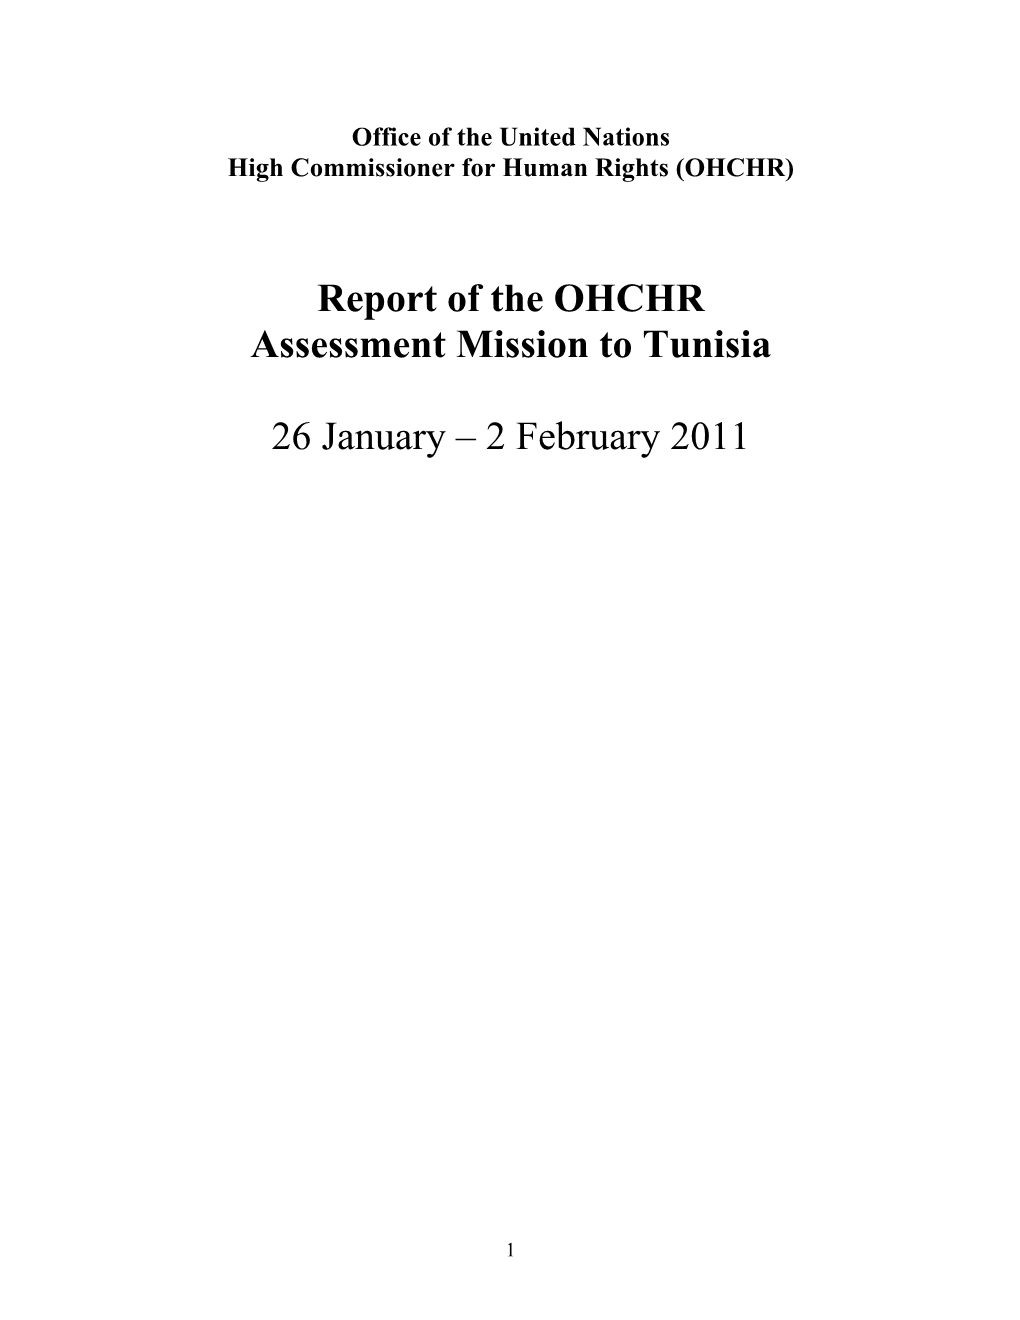 OHCHR Assessment Mission to Tunisia